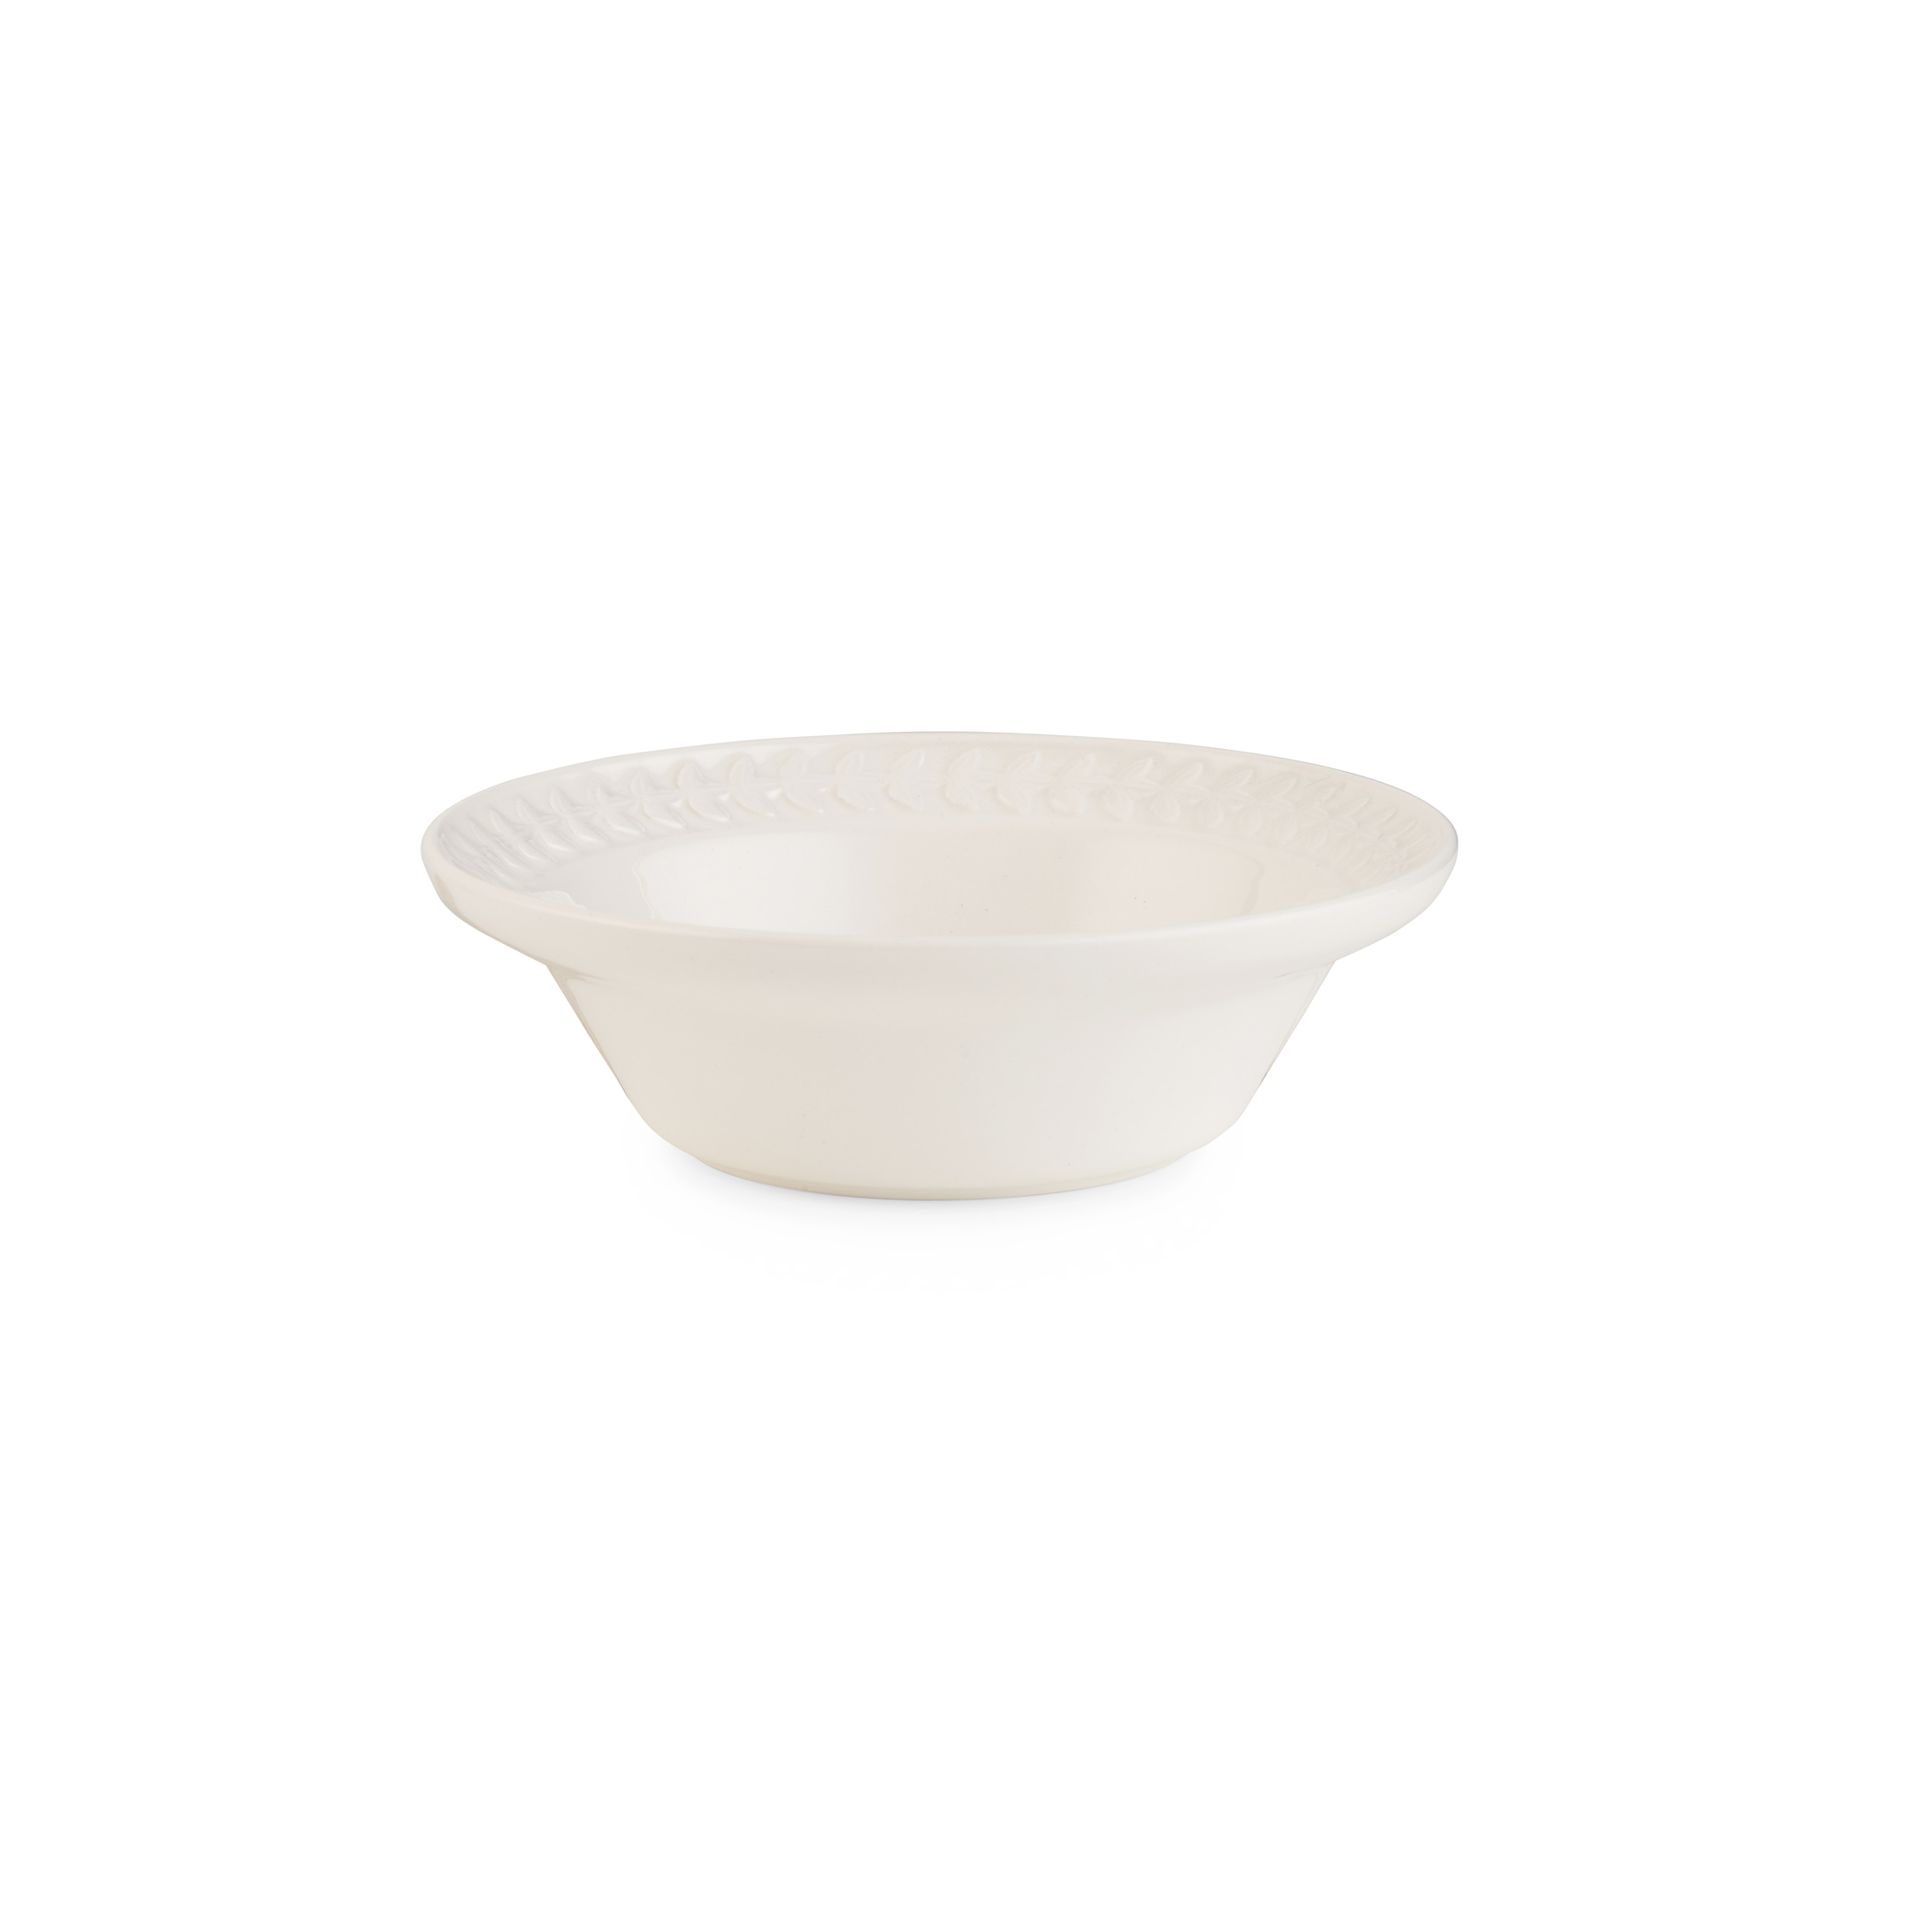 Botanic Garden Harmony Papilio Amber 6 Inch Cereal Bowl  (Cotton Flower) image number null